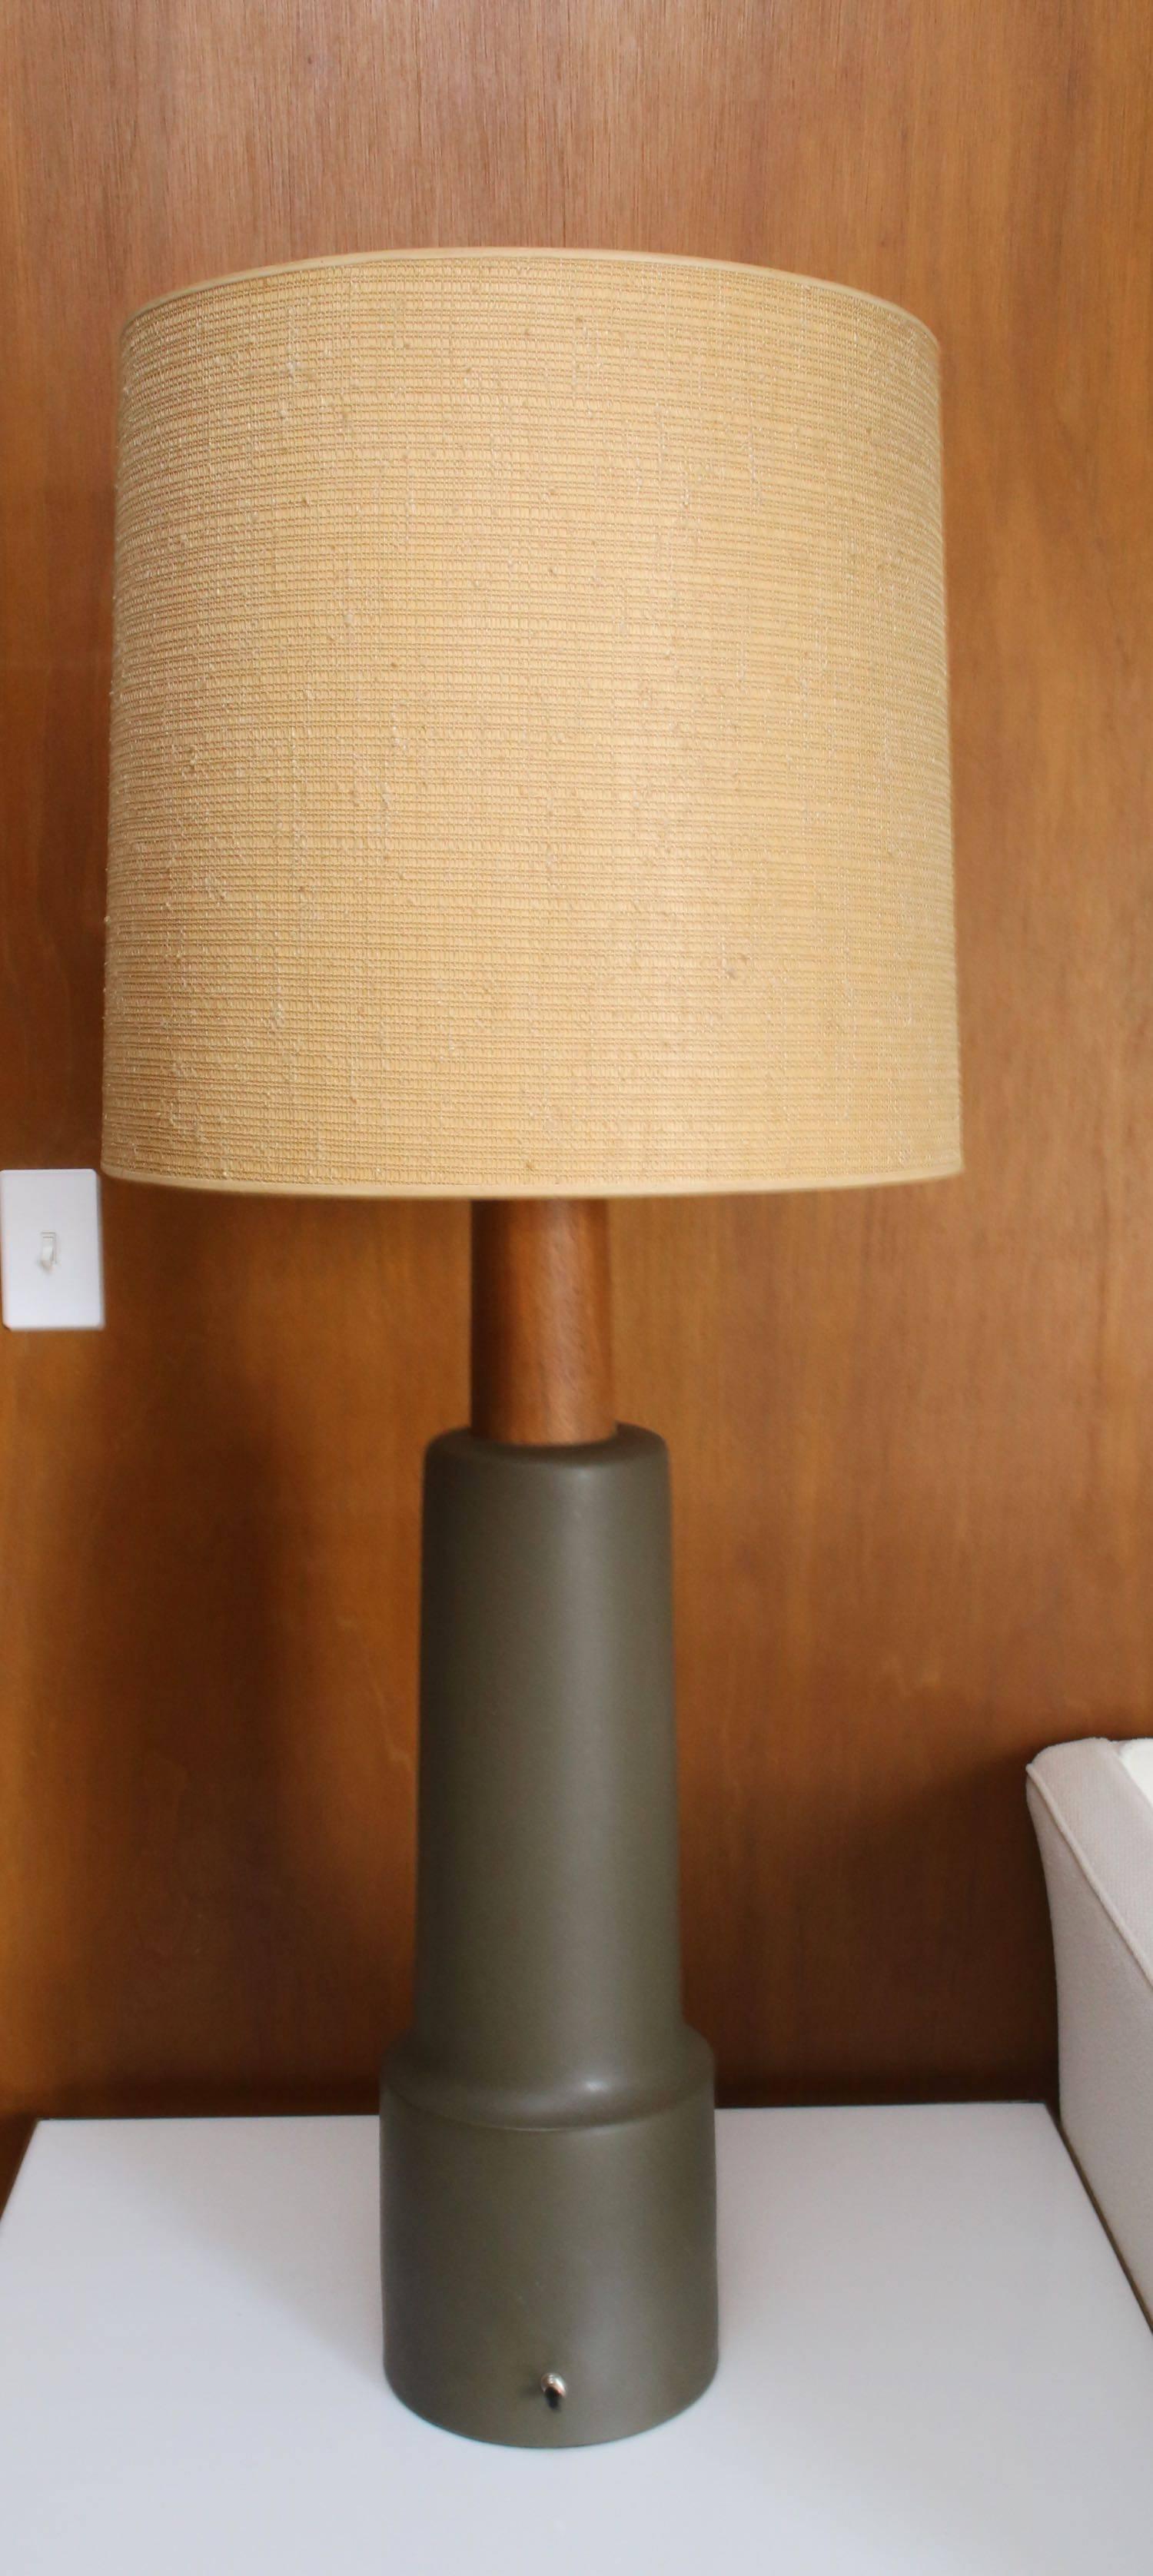 Monumental Martz Pottery Table Floor Lamp In Excellent Condition For Sale In St. Louis, MO